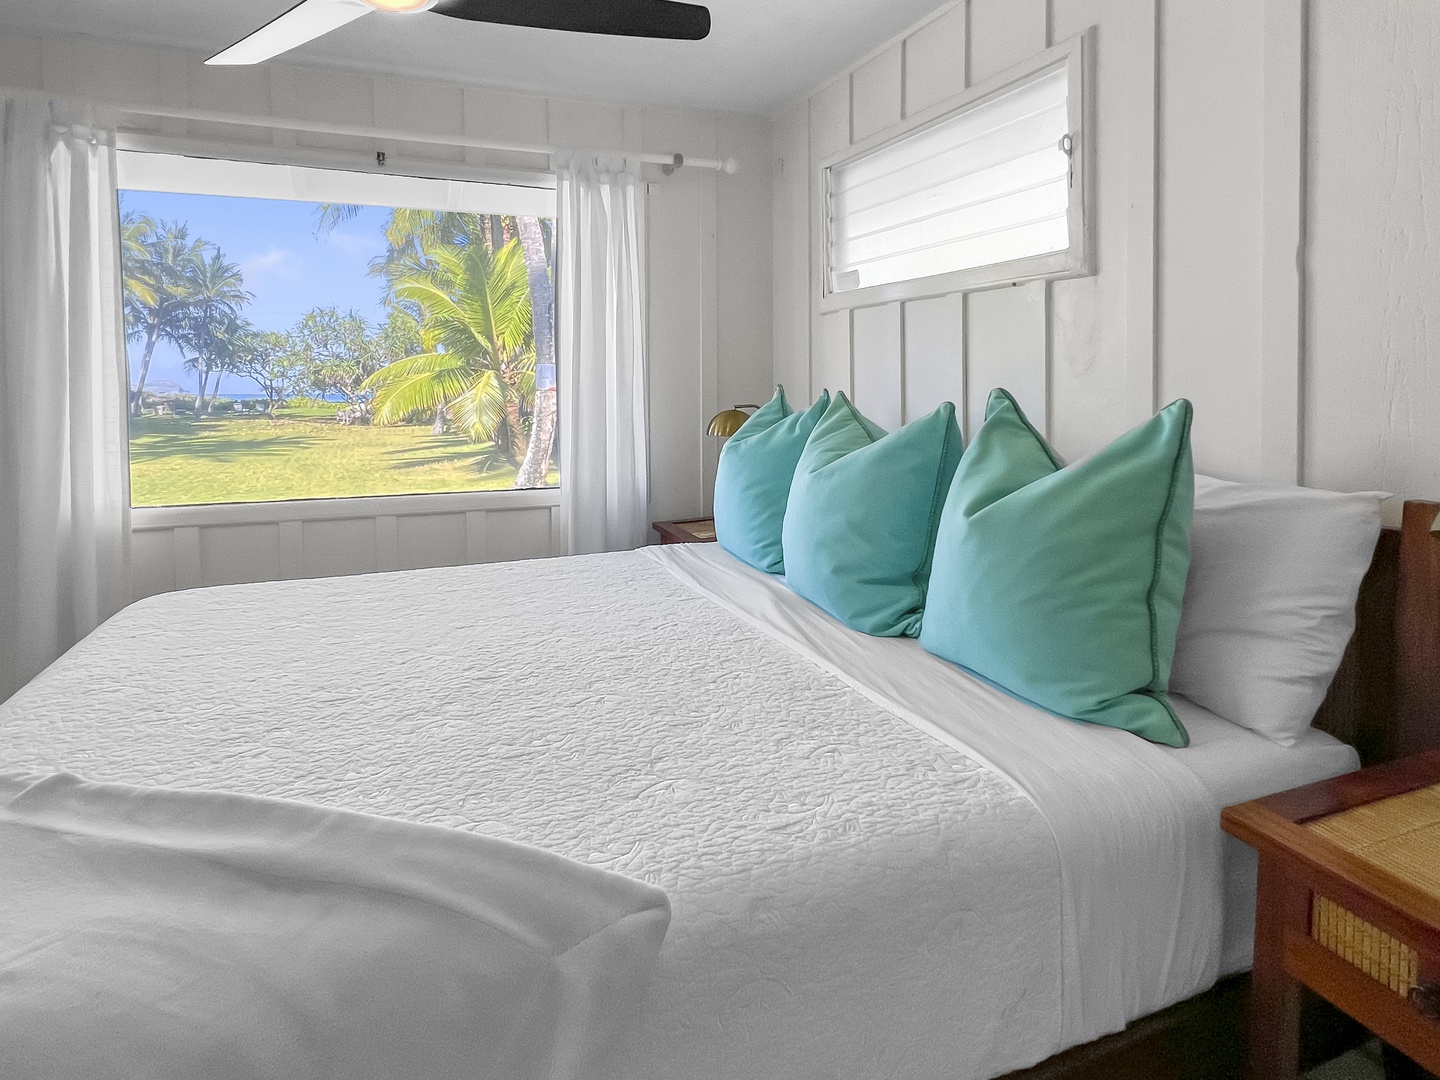 Kailua Vacation Rentals, Kai Mele - Guest Bedroom 3 has a king bed, ocean and garden views, split AC, and a ceiling fan